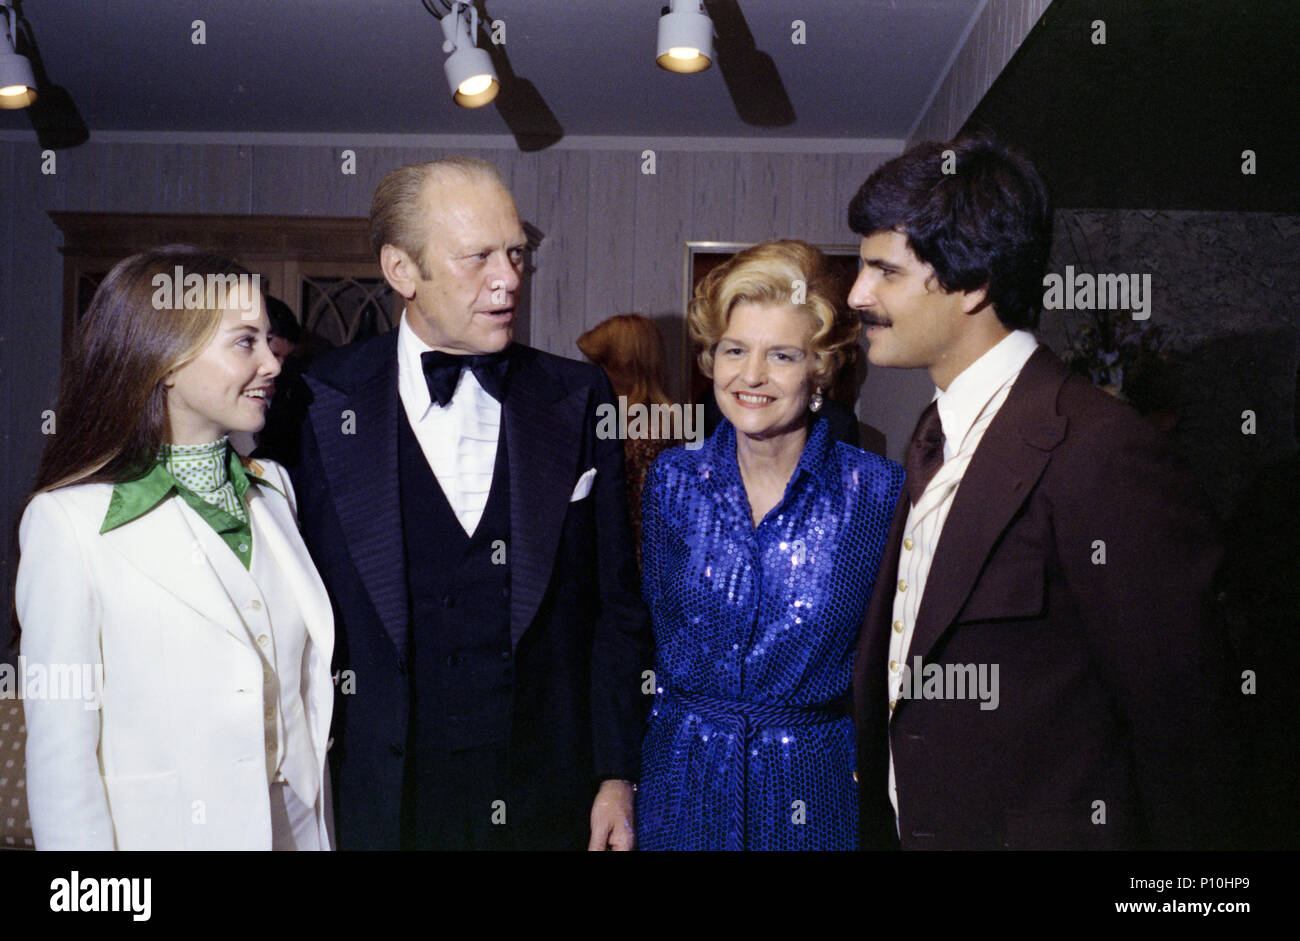 1976, October 7 – Beverly Hilton Hotel - President's Suite – Beverly Hills, CA – Gerald R. Ford, Betty Ford, Mark Spitz, Suzy Spitz – standing, talking, posing; formal wear – Presentation of the Presidential Medal of Freedom to Jesse Owens Ceremony - US Olympic Committee Stock Photo